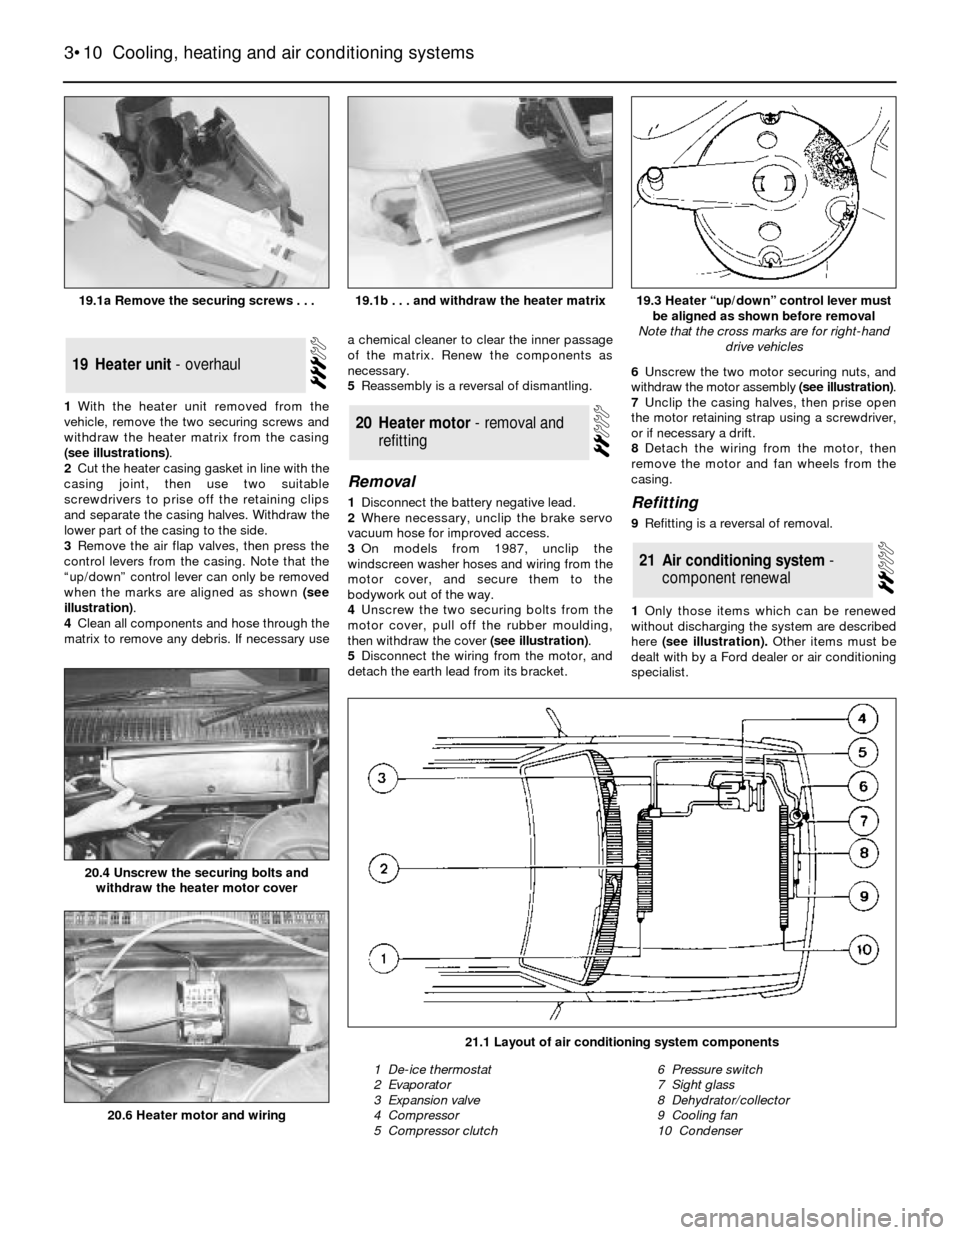 FORD SIERRA 1983 1.G Cooling And Air Conditioning Systems Workshop Manual 1With the heater unit removed from the
vehicle, remove the two securing screws and
withdraw the heater matrix from the casing
(see illustrations).
2Cut the heater casing gasket in line with the
casing